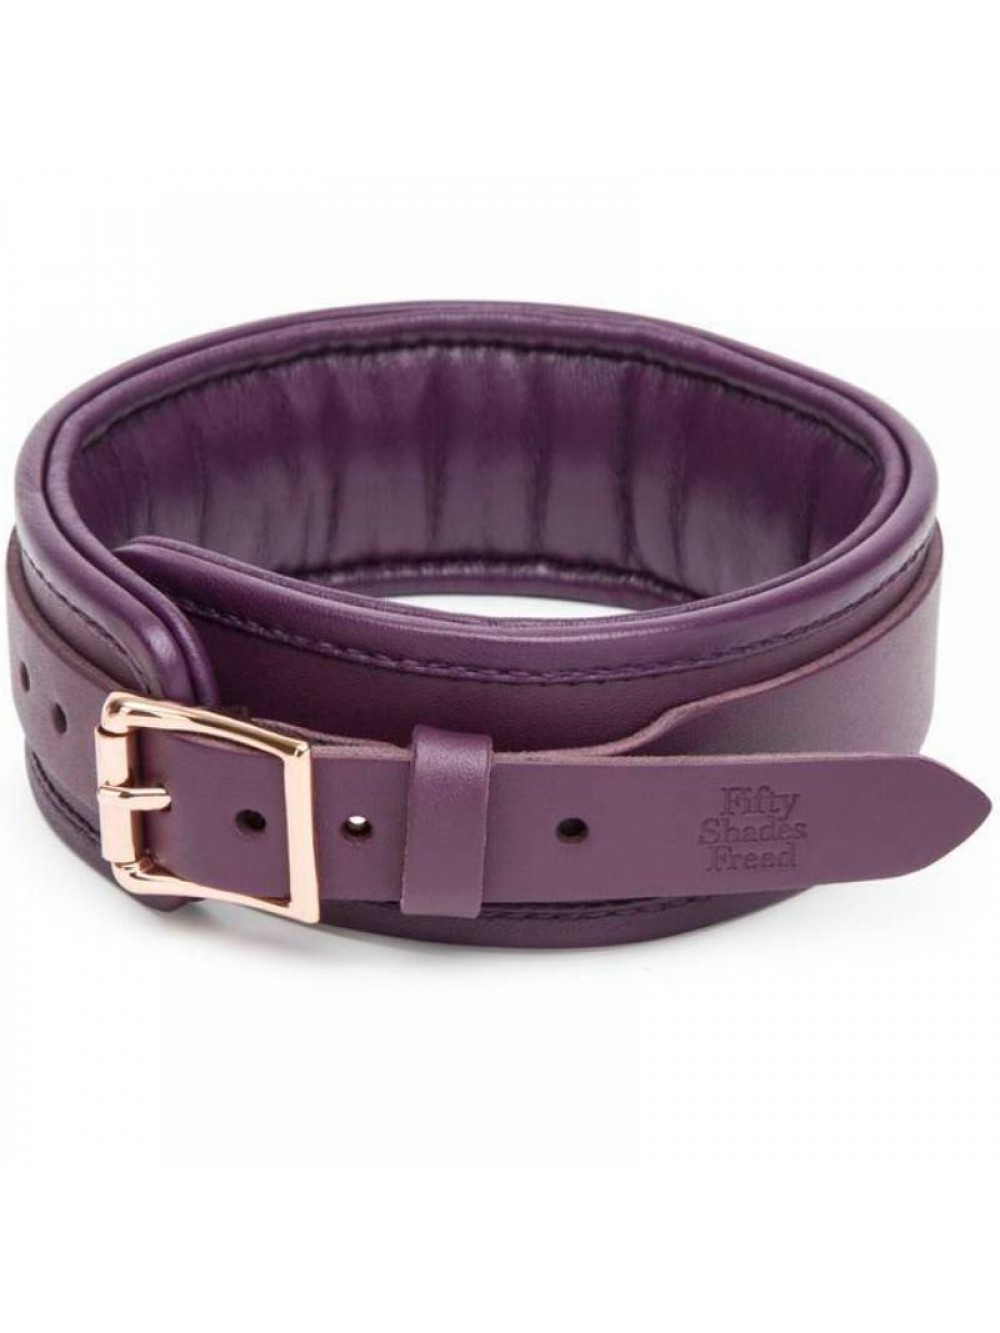 FIFTY SHADES FREED LEATHER COLLAR AND LEAD 5060493003525